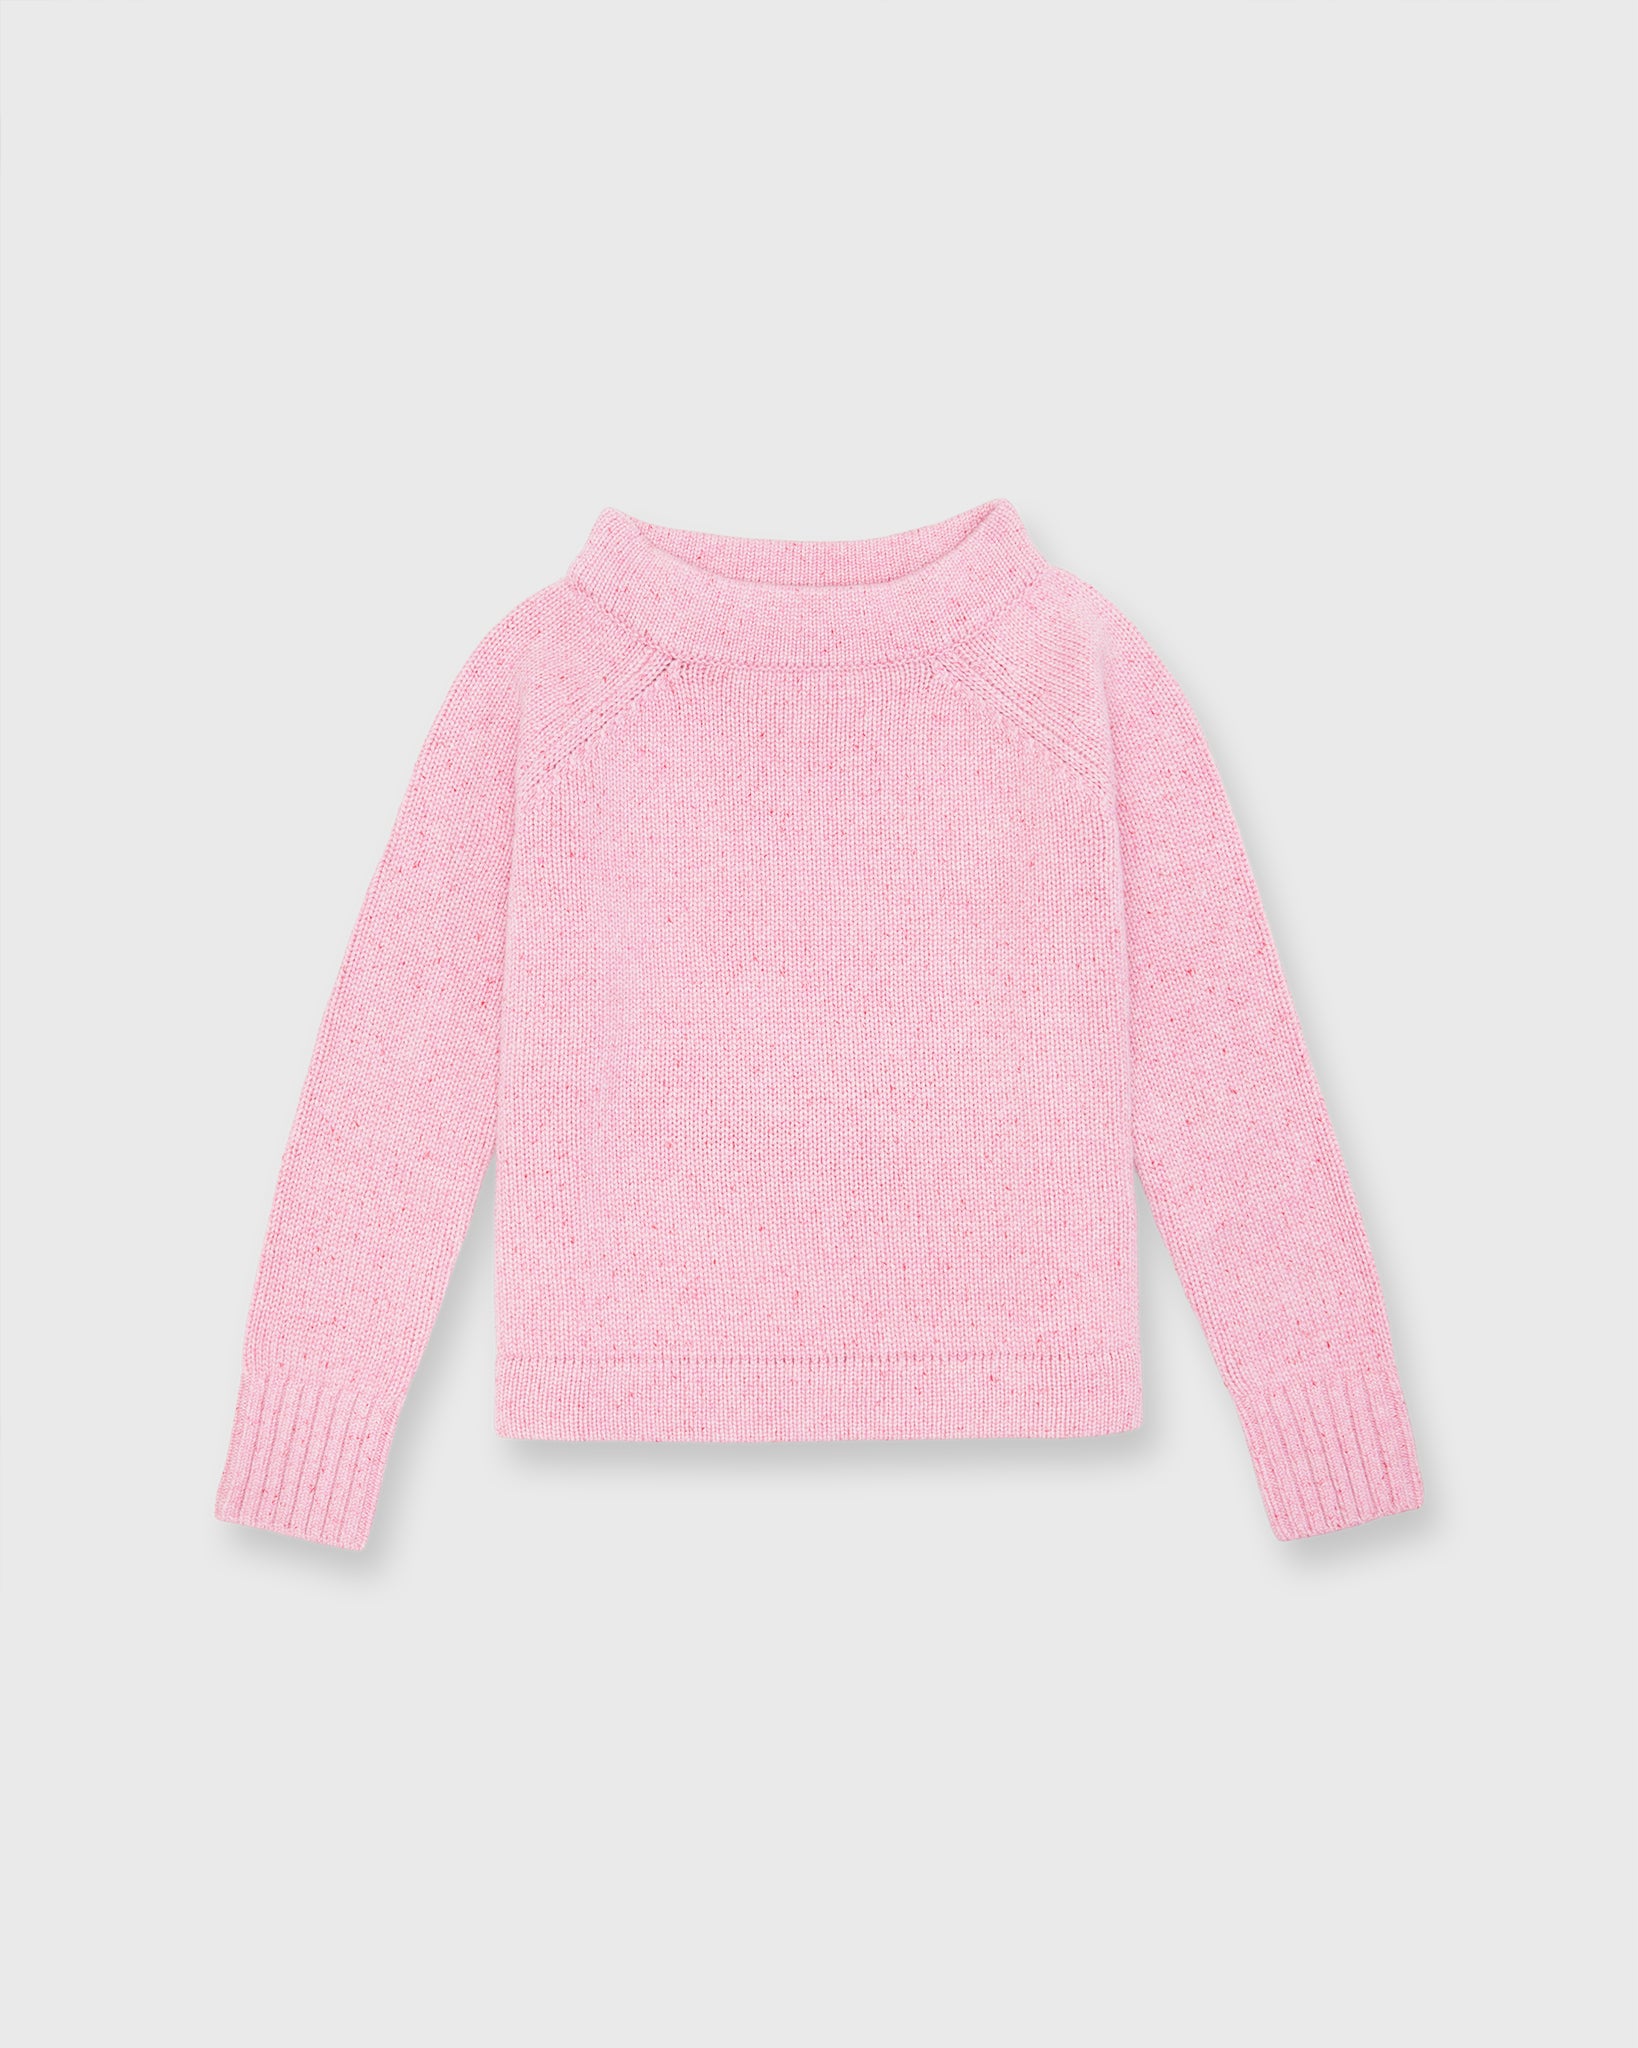 Donegal Cashmere Golightly Ann Sweater in | Mashburn Pink Shop